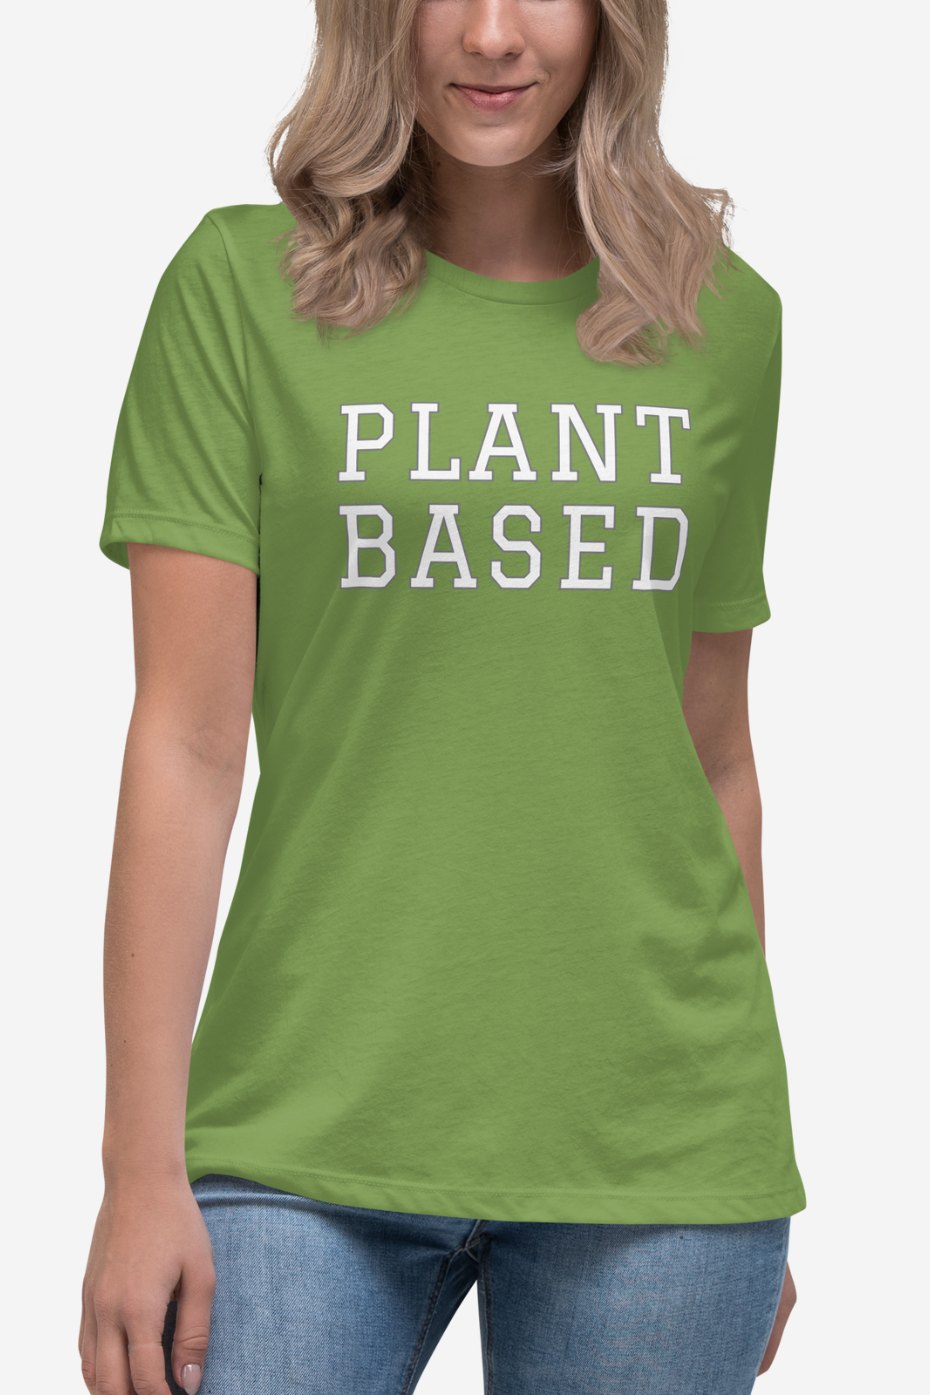 Plant Based Women's Relaxed T-Shirt